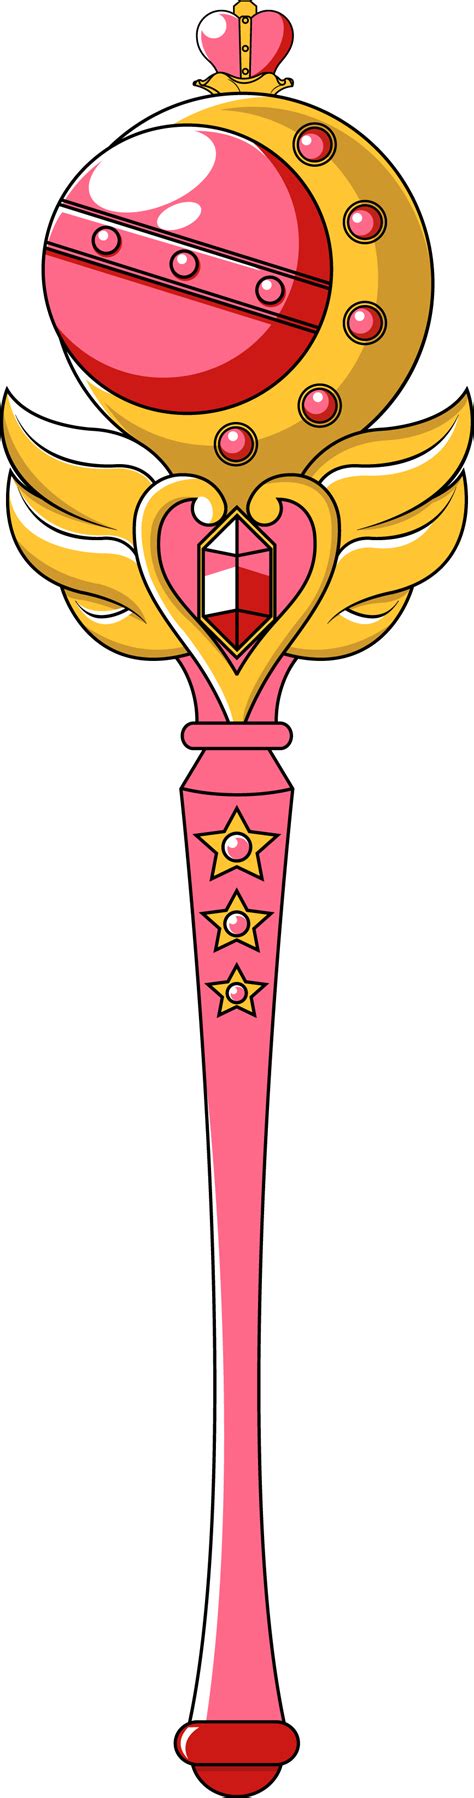 Download Images For Anime Fantasy Art Sailor Moon Wand Png PNG Image With No Background